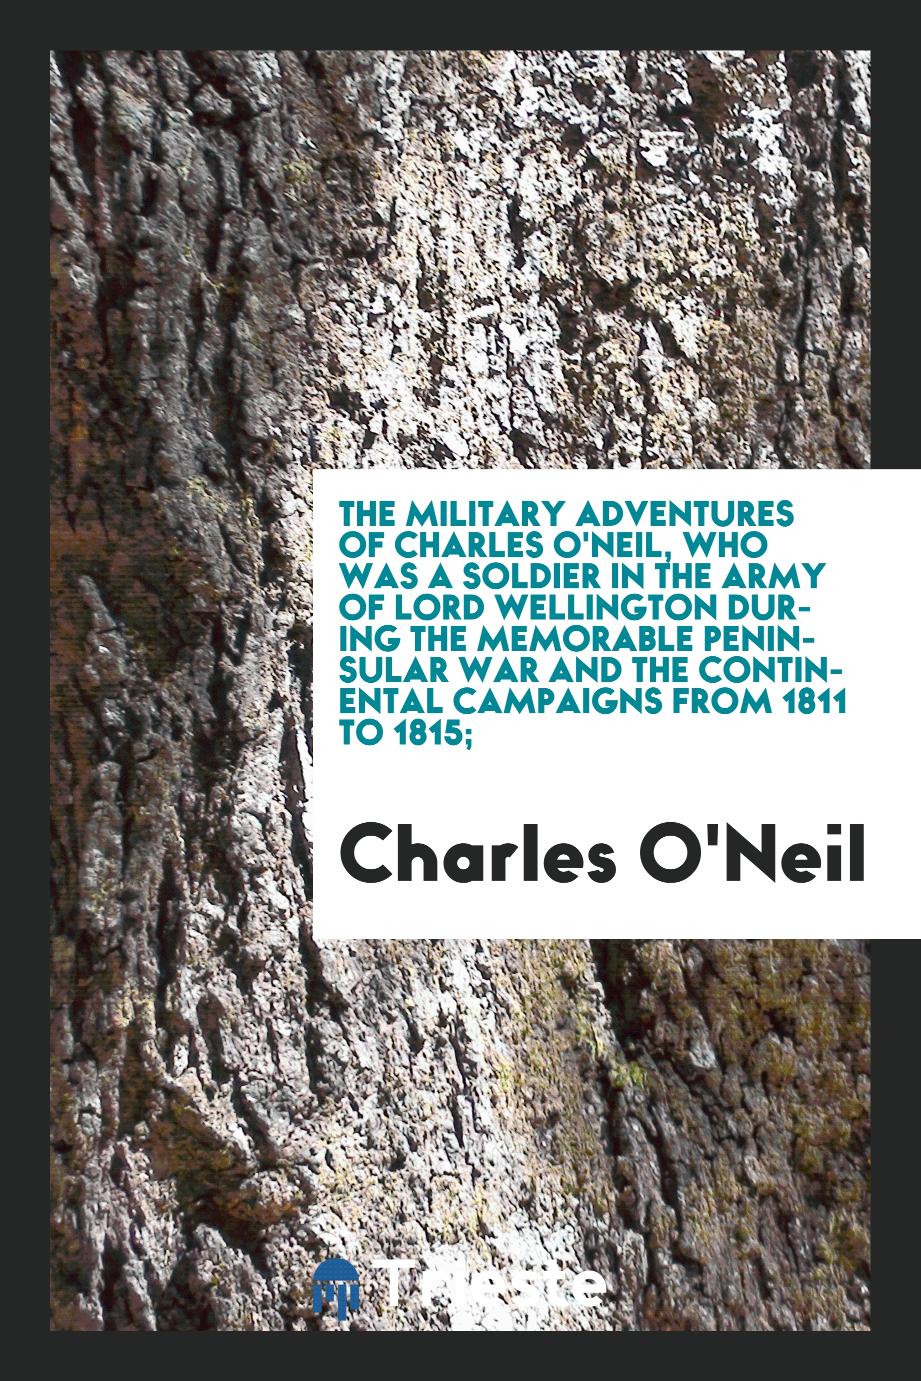 The military adventures of Charles O'Neil, who was a soldier in the army of Lord Wellington during the memorable peninsular war and the continental campaigns from 1811 to 1815;